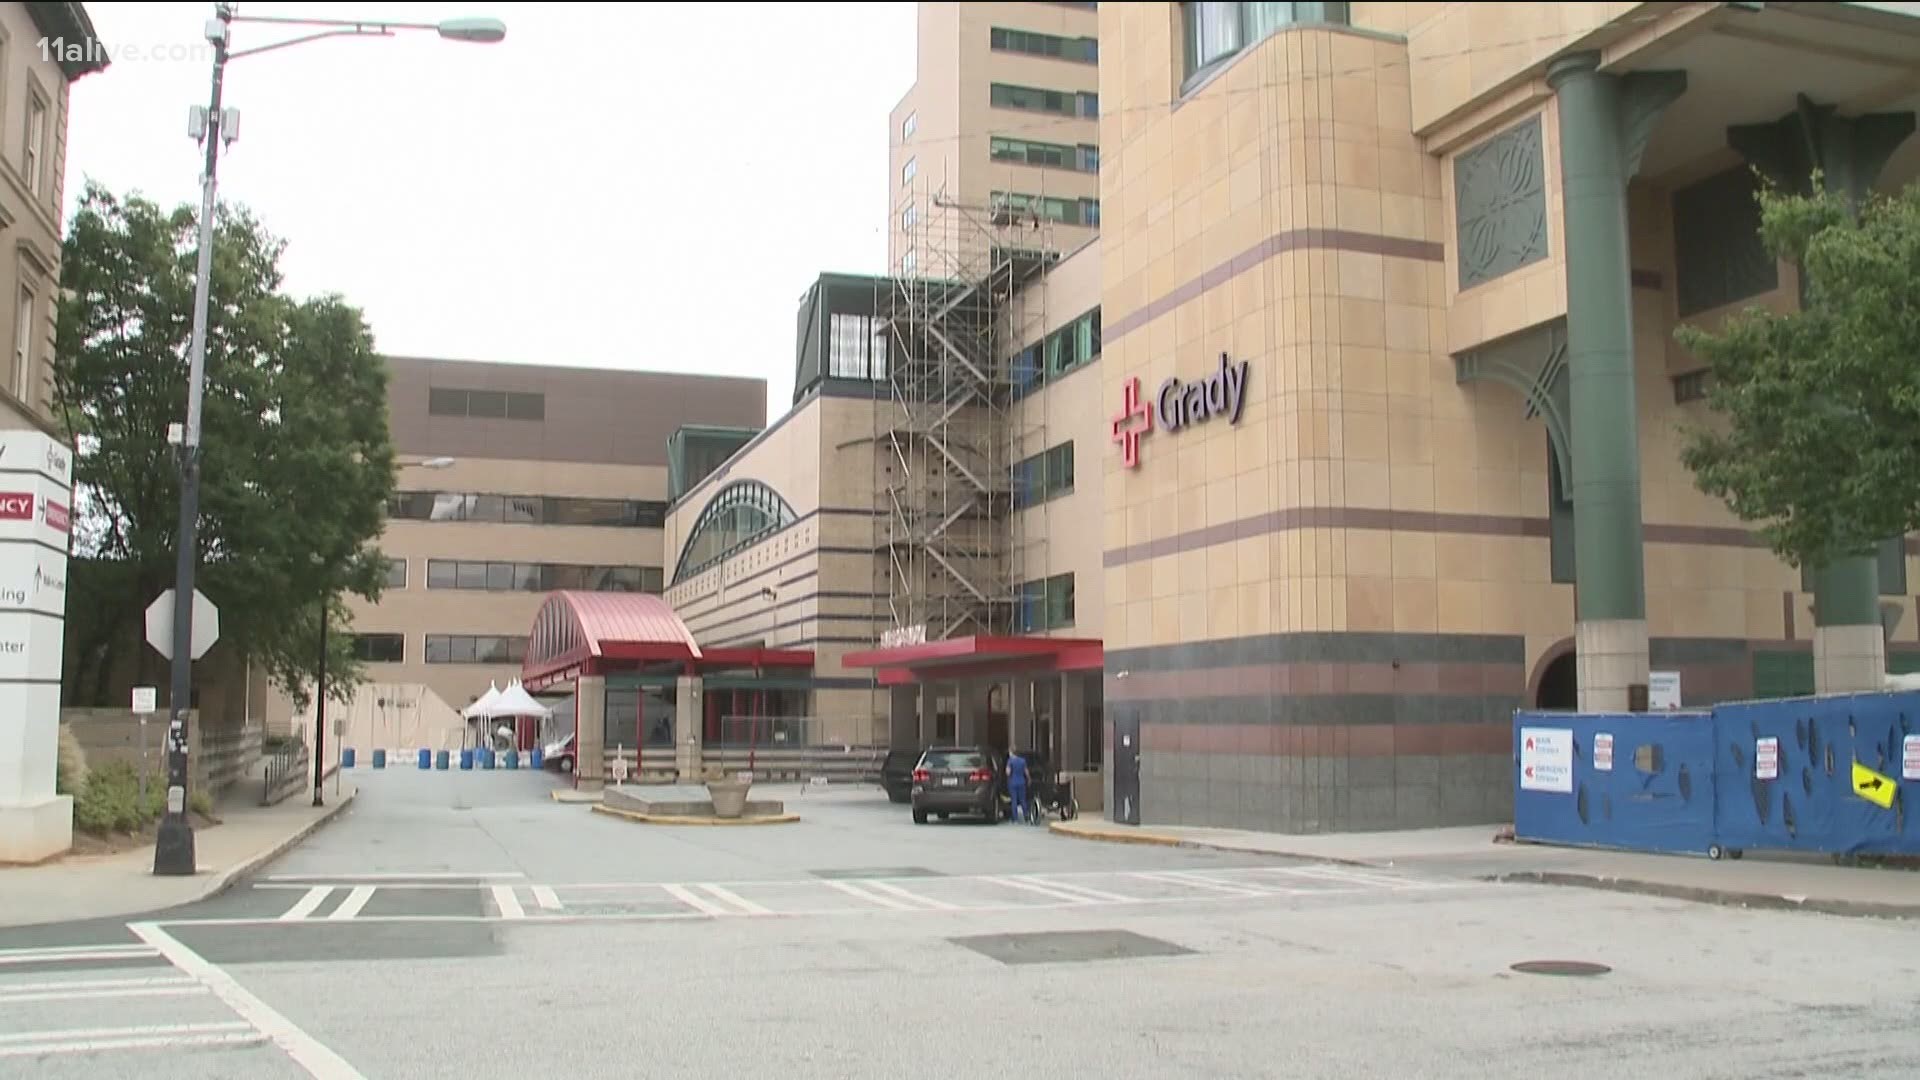 Grady Hospital says it's beginning to fill up.